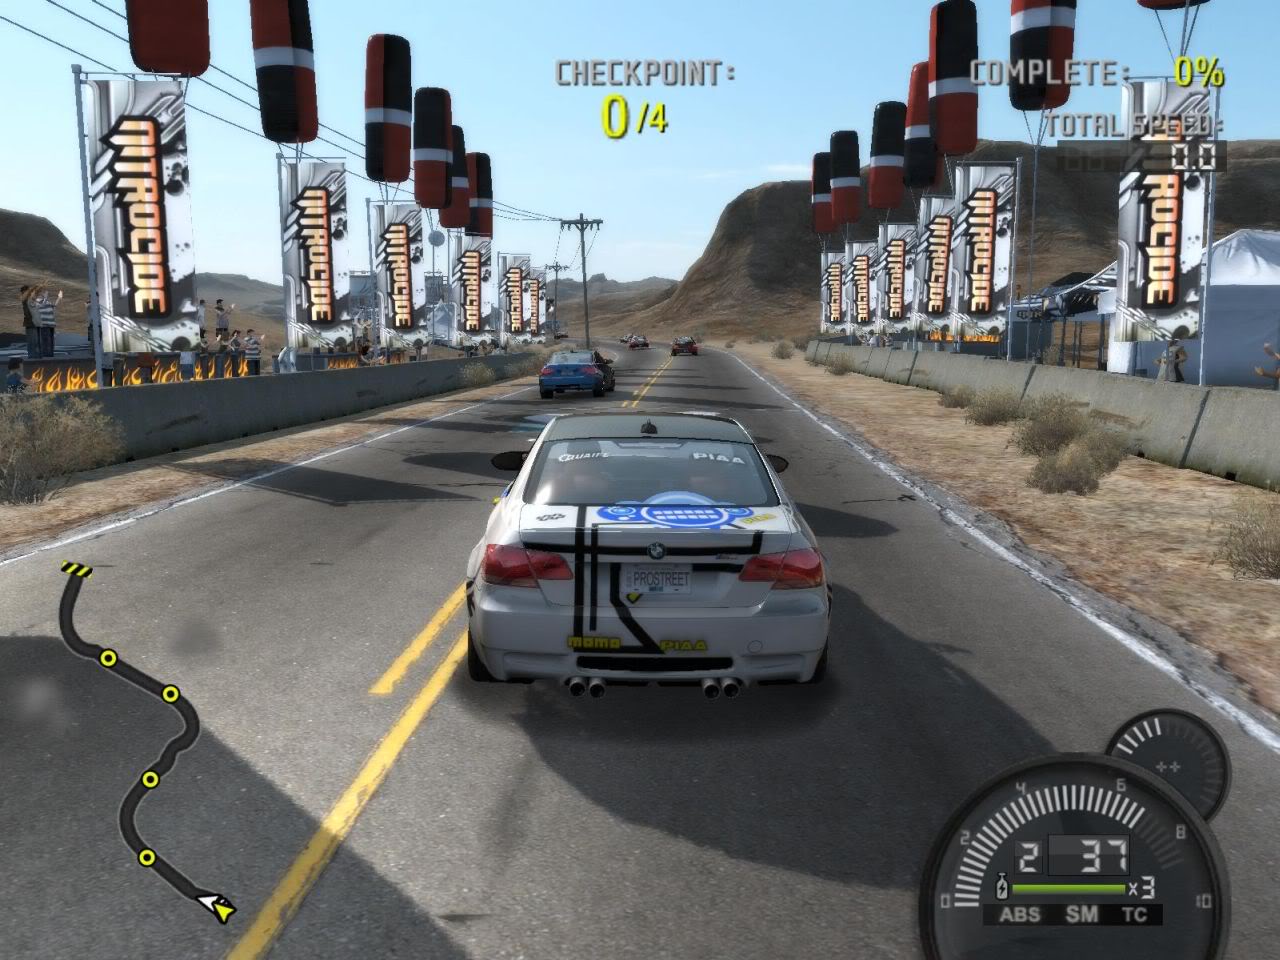 download game need for speed pro street pc torrent